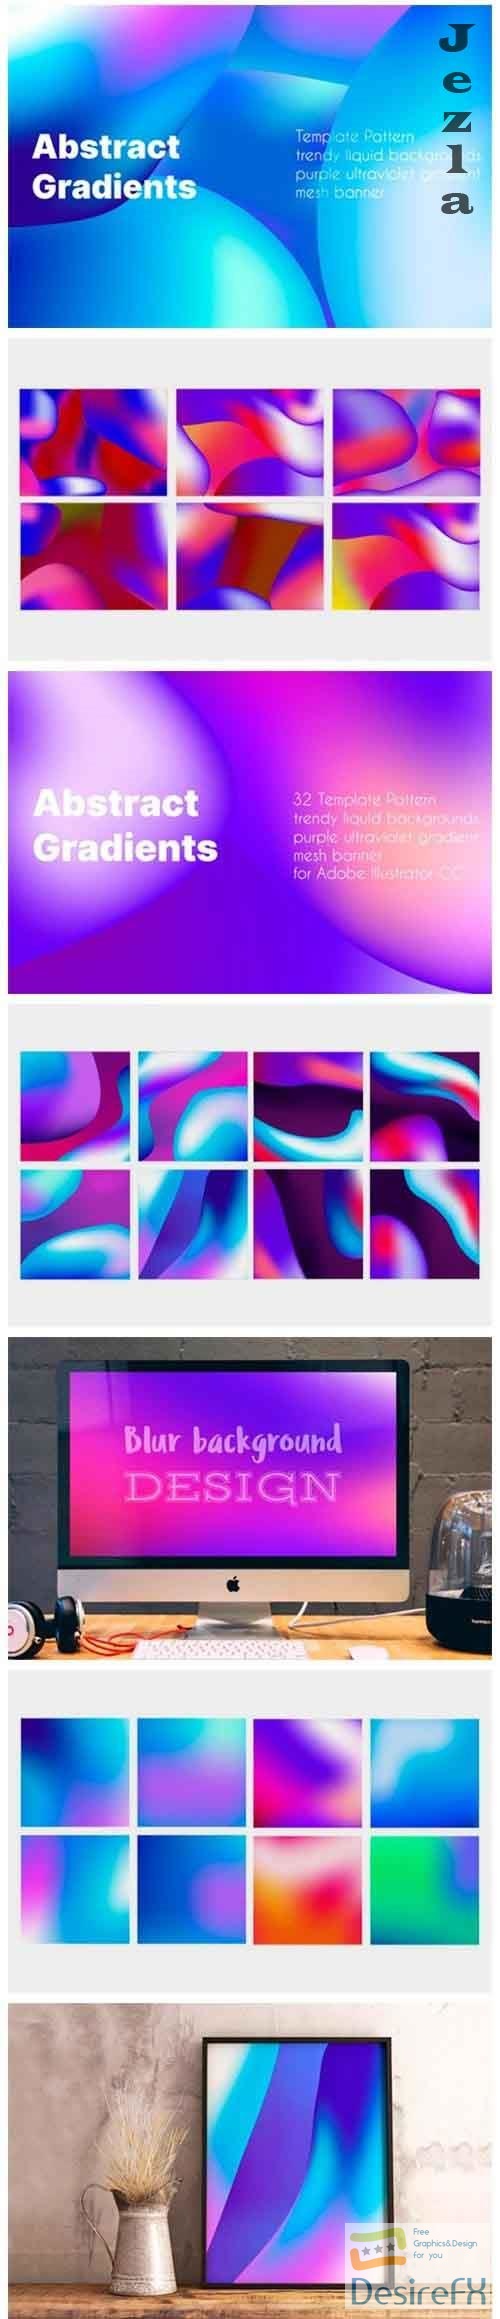 Backgrounds gradient template - 5737689